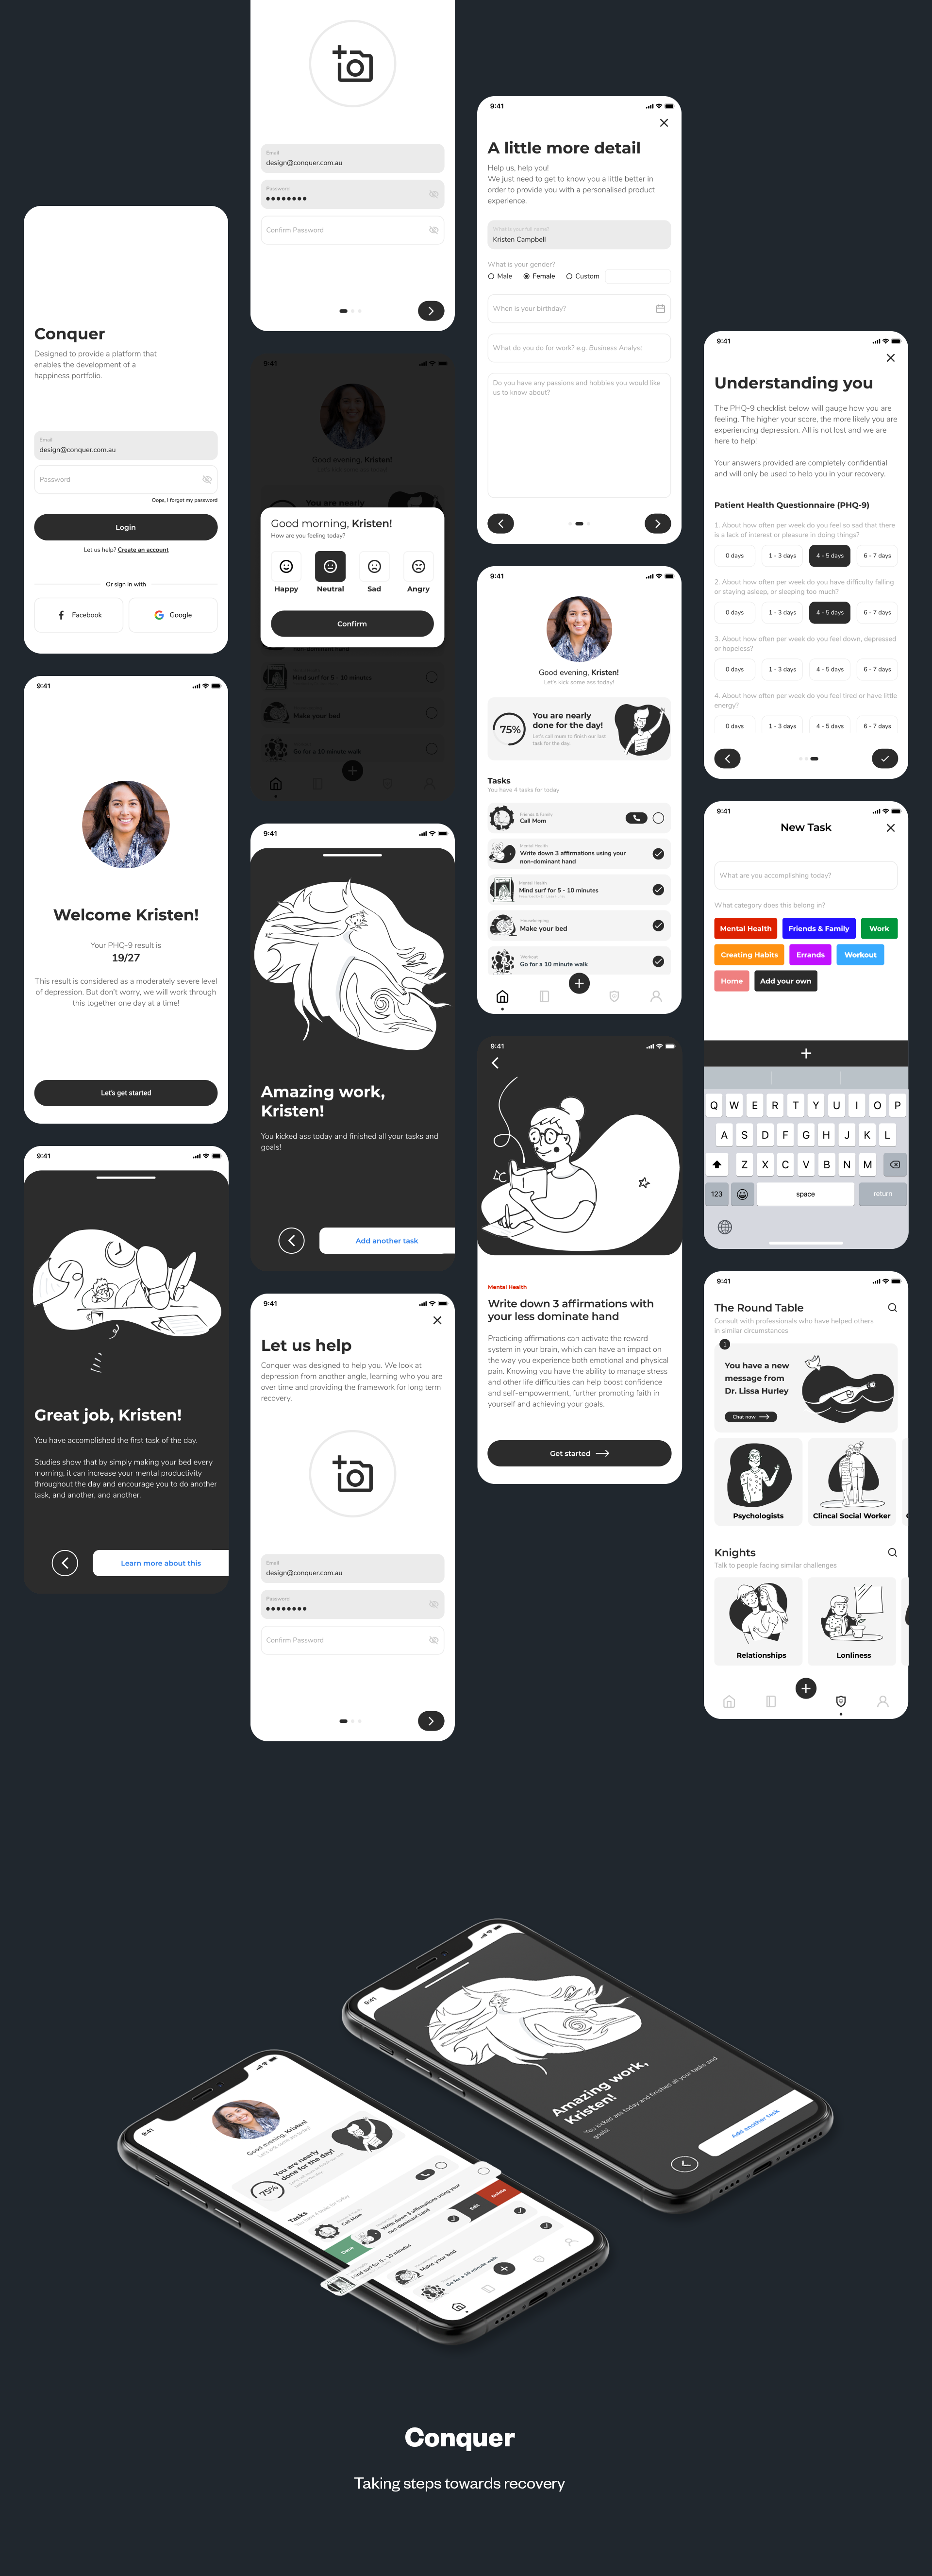 Conquer-High-Visual-Fidelity-Wireframes